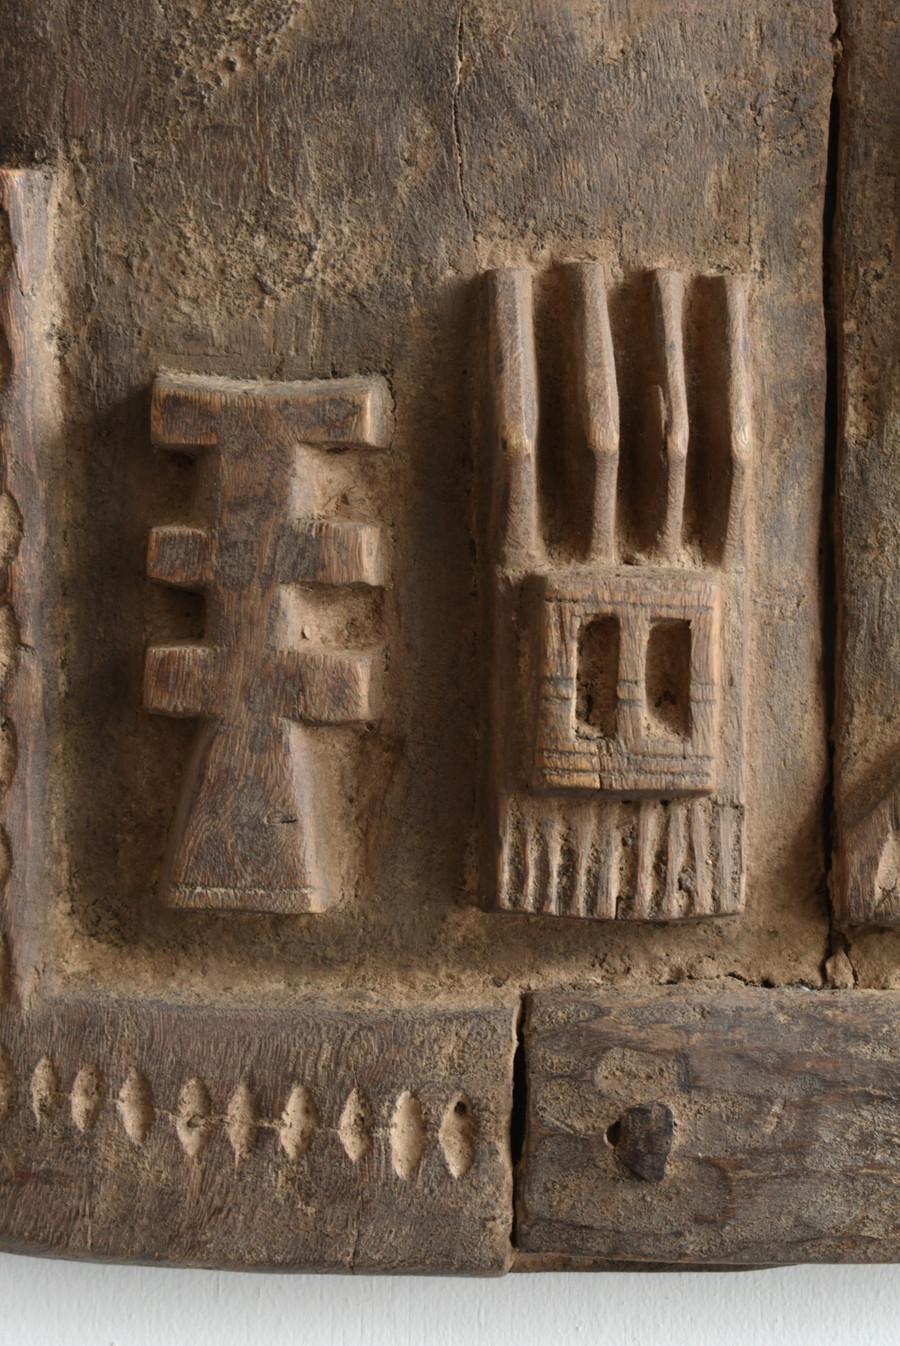 20th Century African Dogon door/20th century/wall hanging object/tribal sculpture